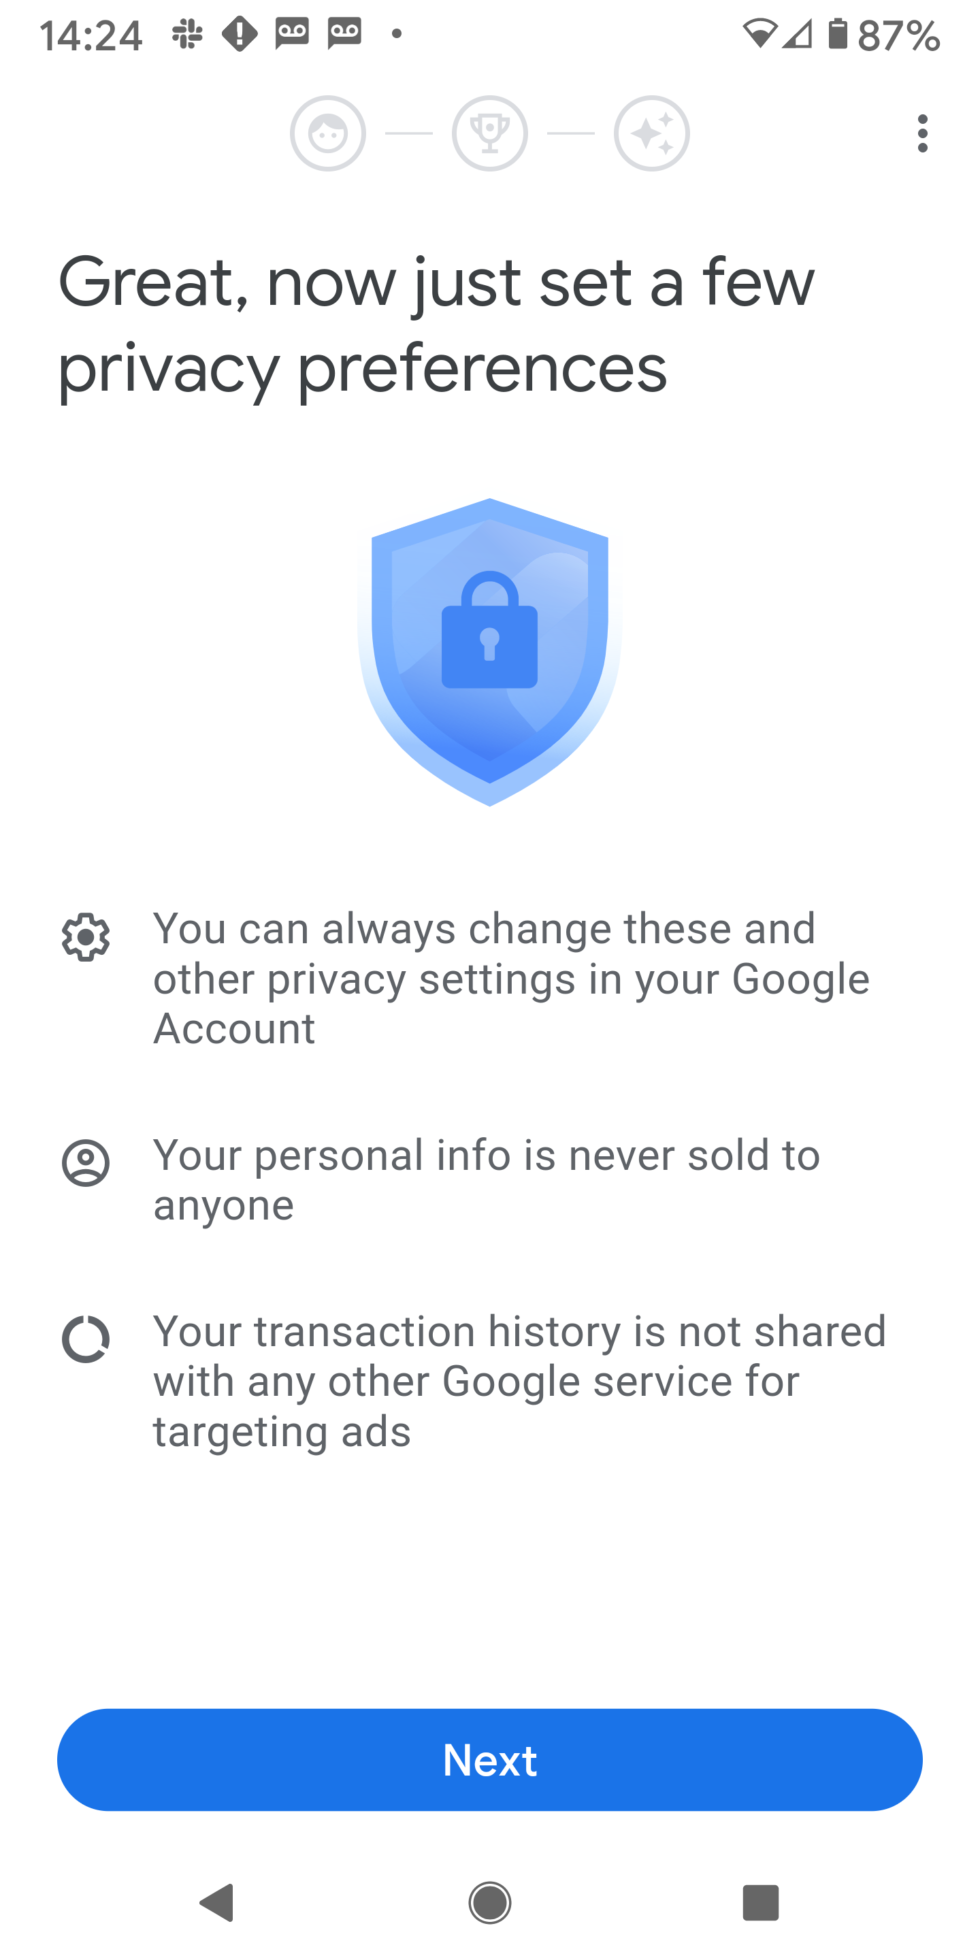 privacypreferences-980x1960.png